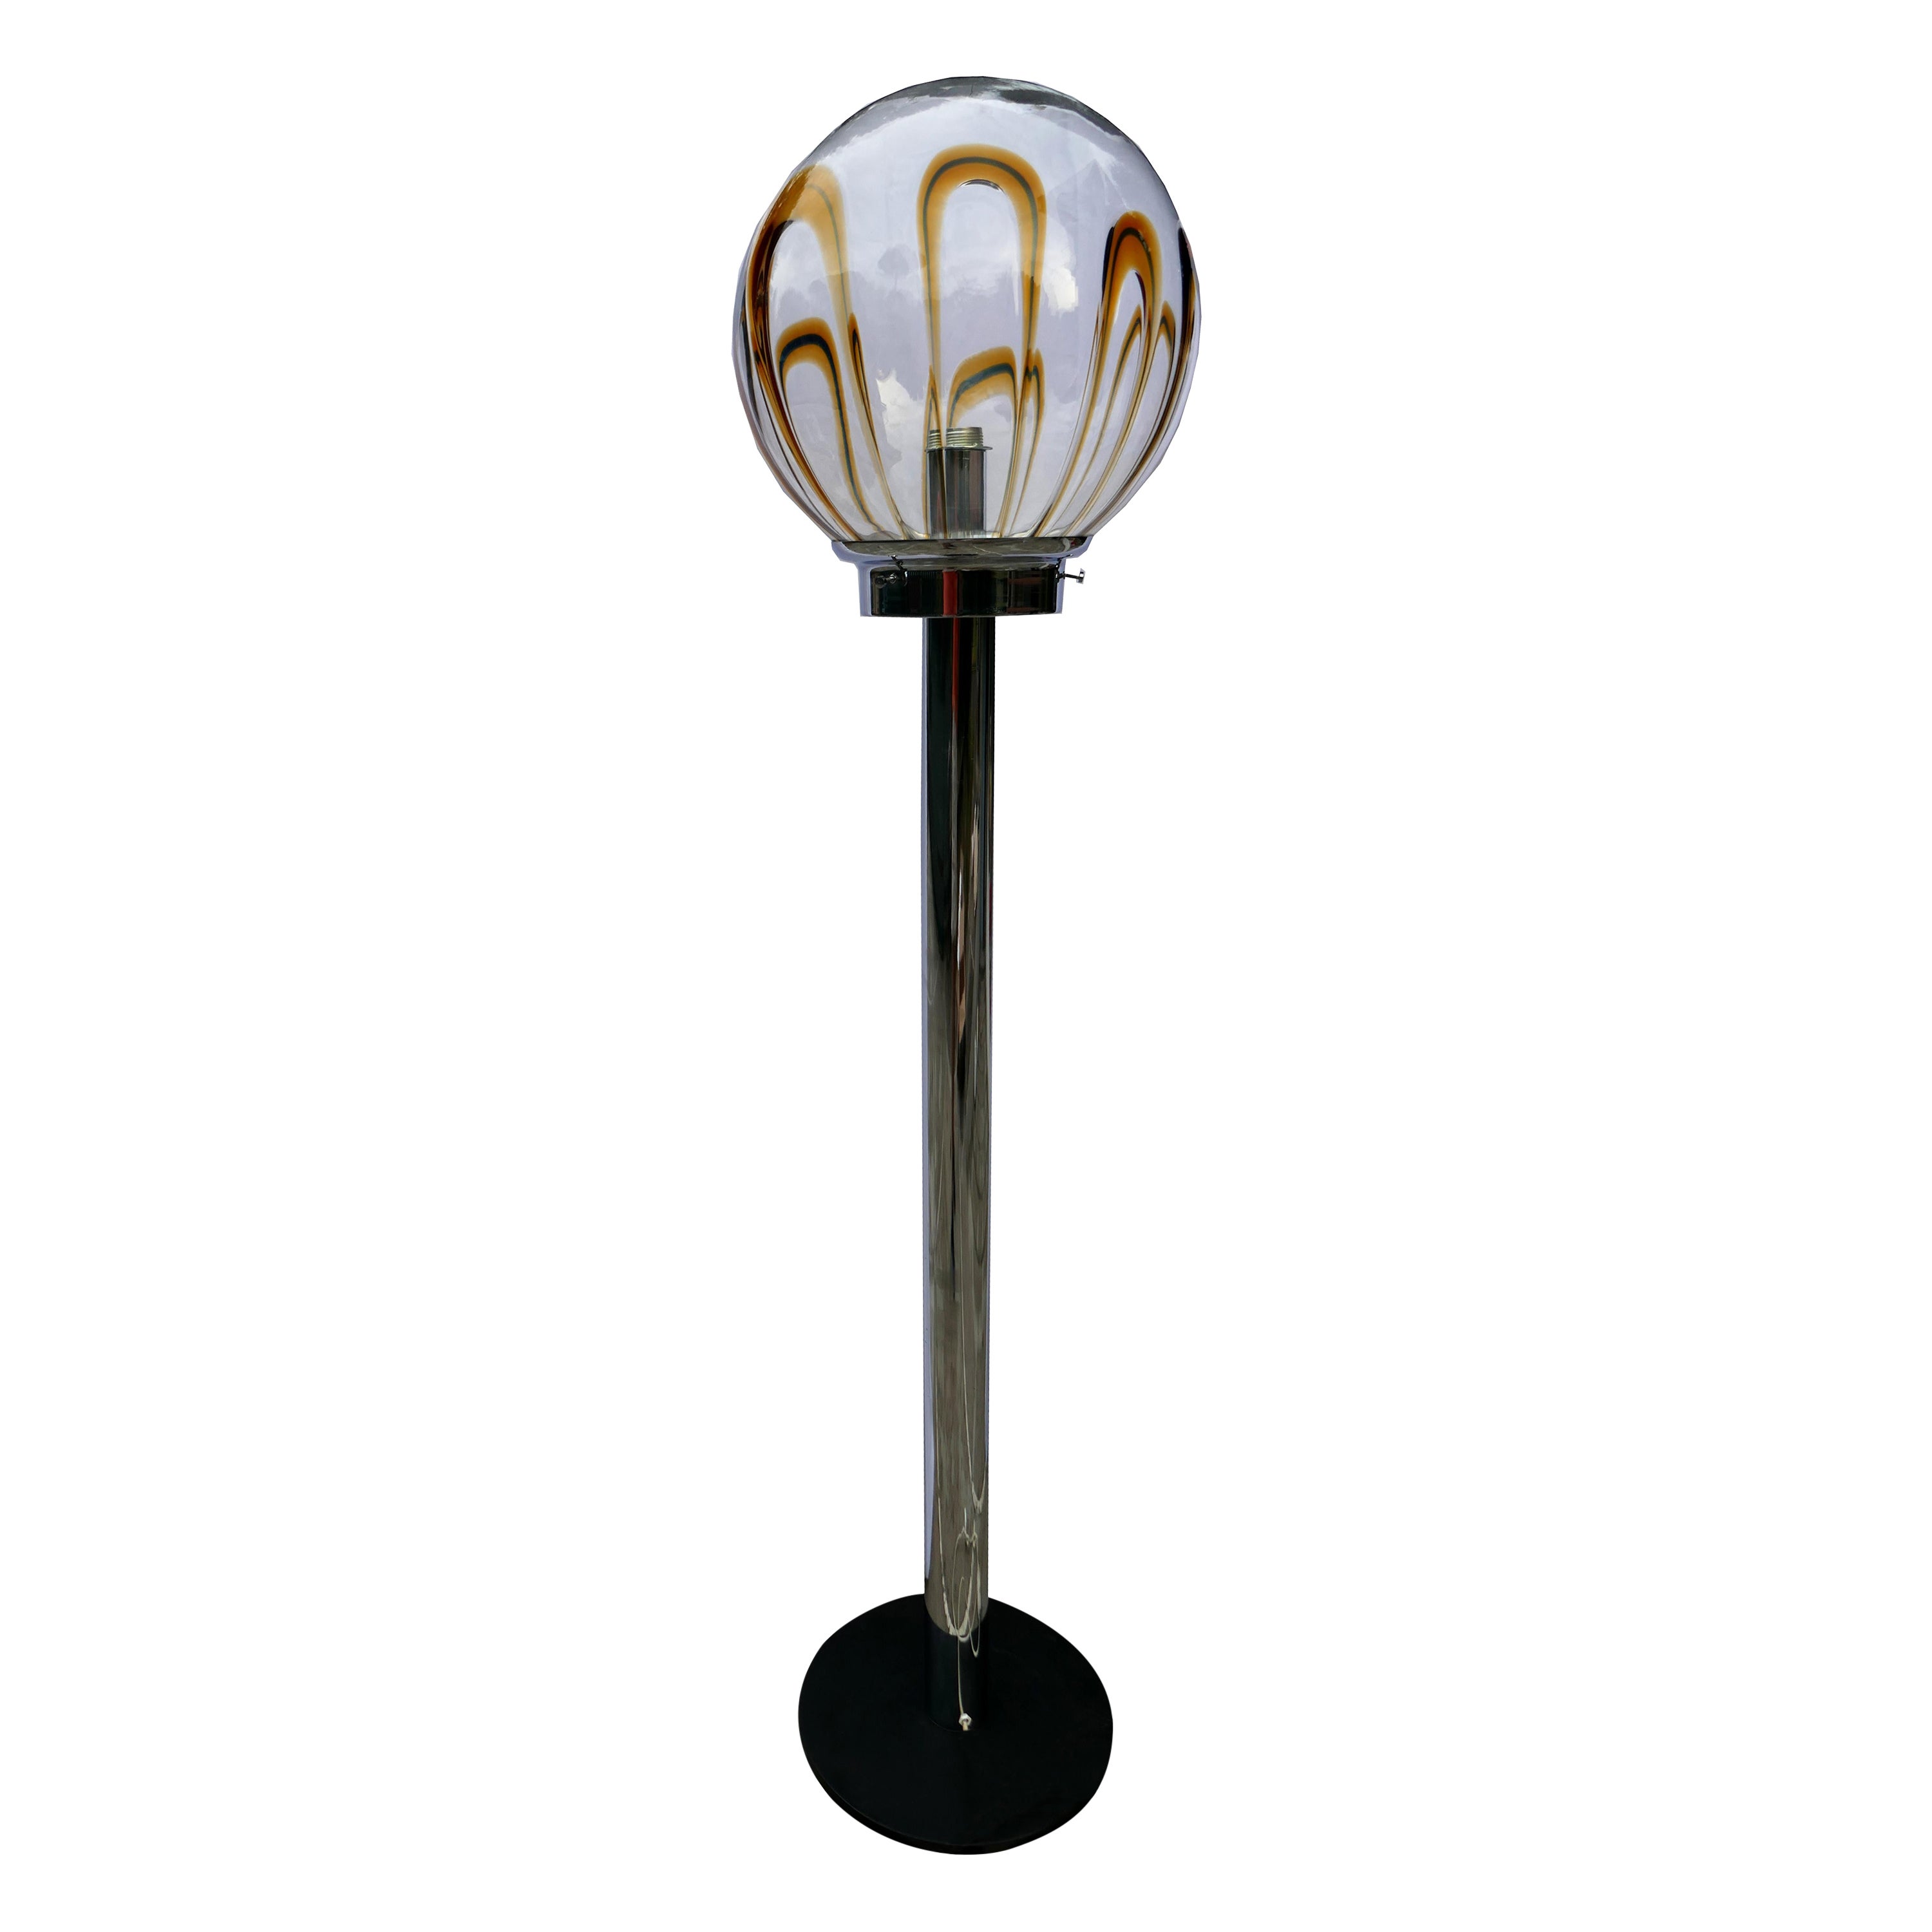 Floor lamp attributed to Toni Zuccheri for VeArt or Venini